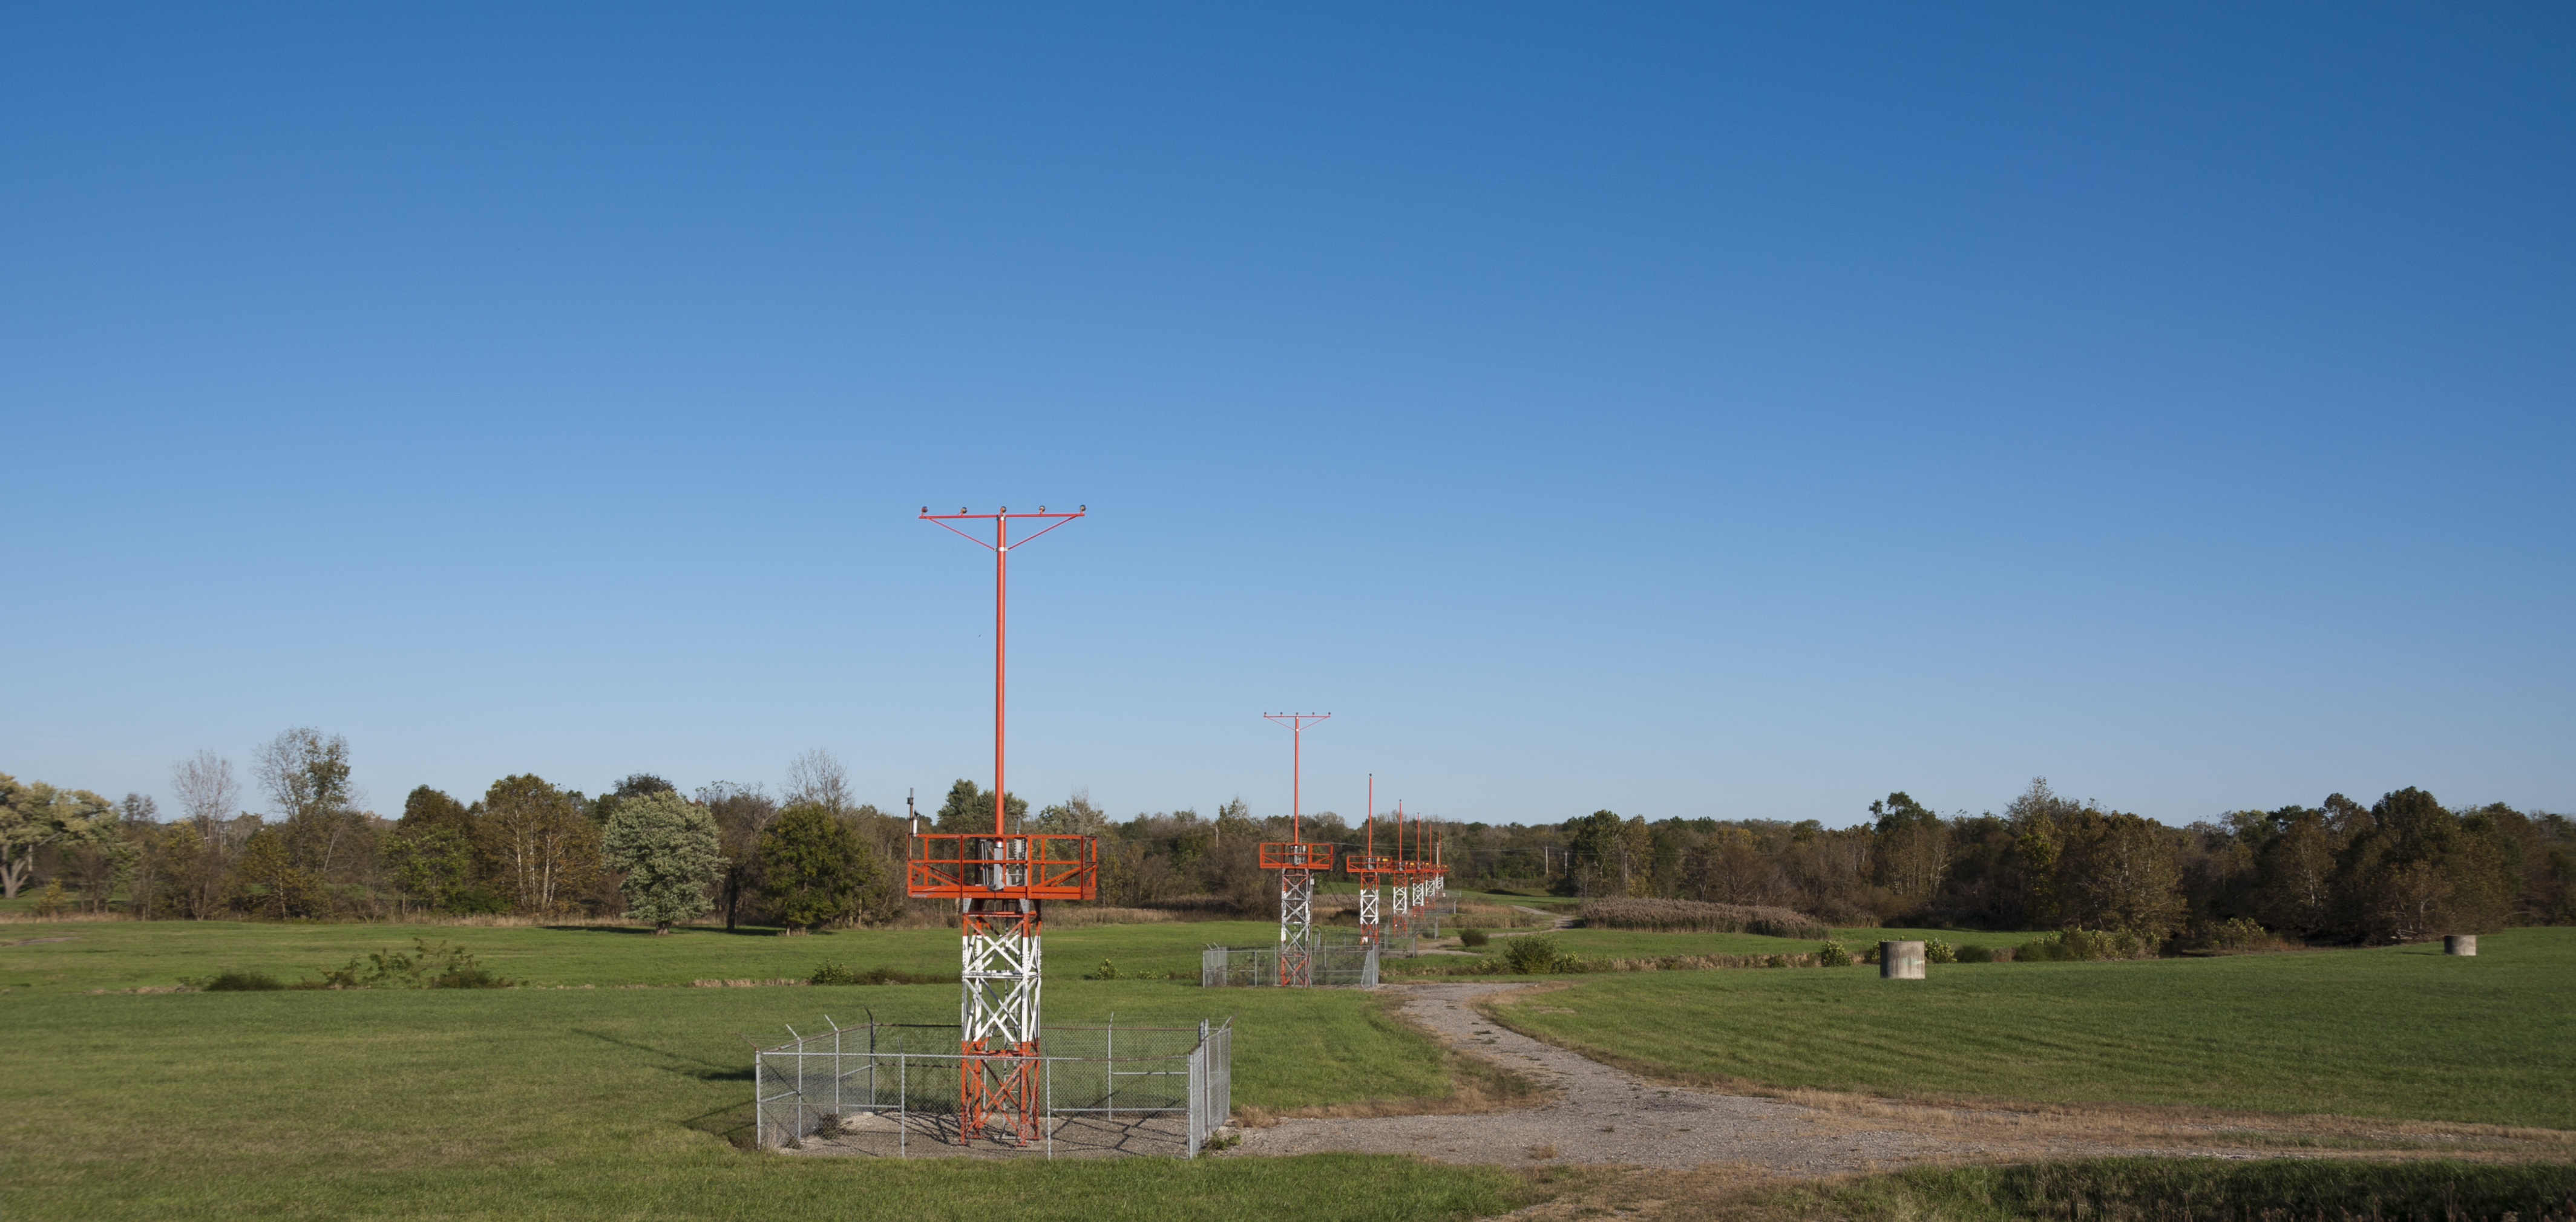 KCMH Approach Lights for 10L28R 1